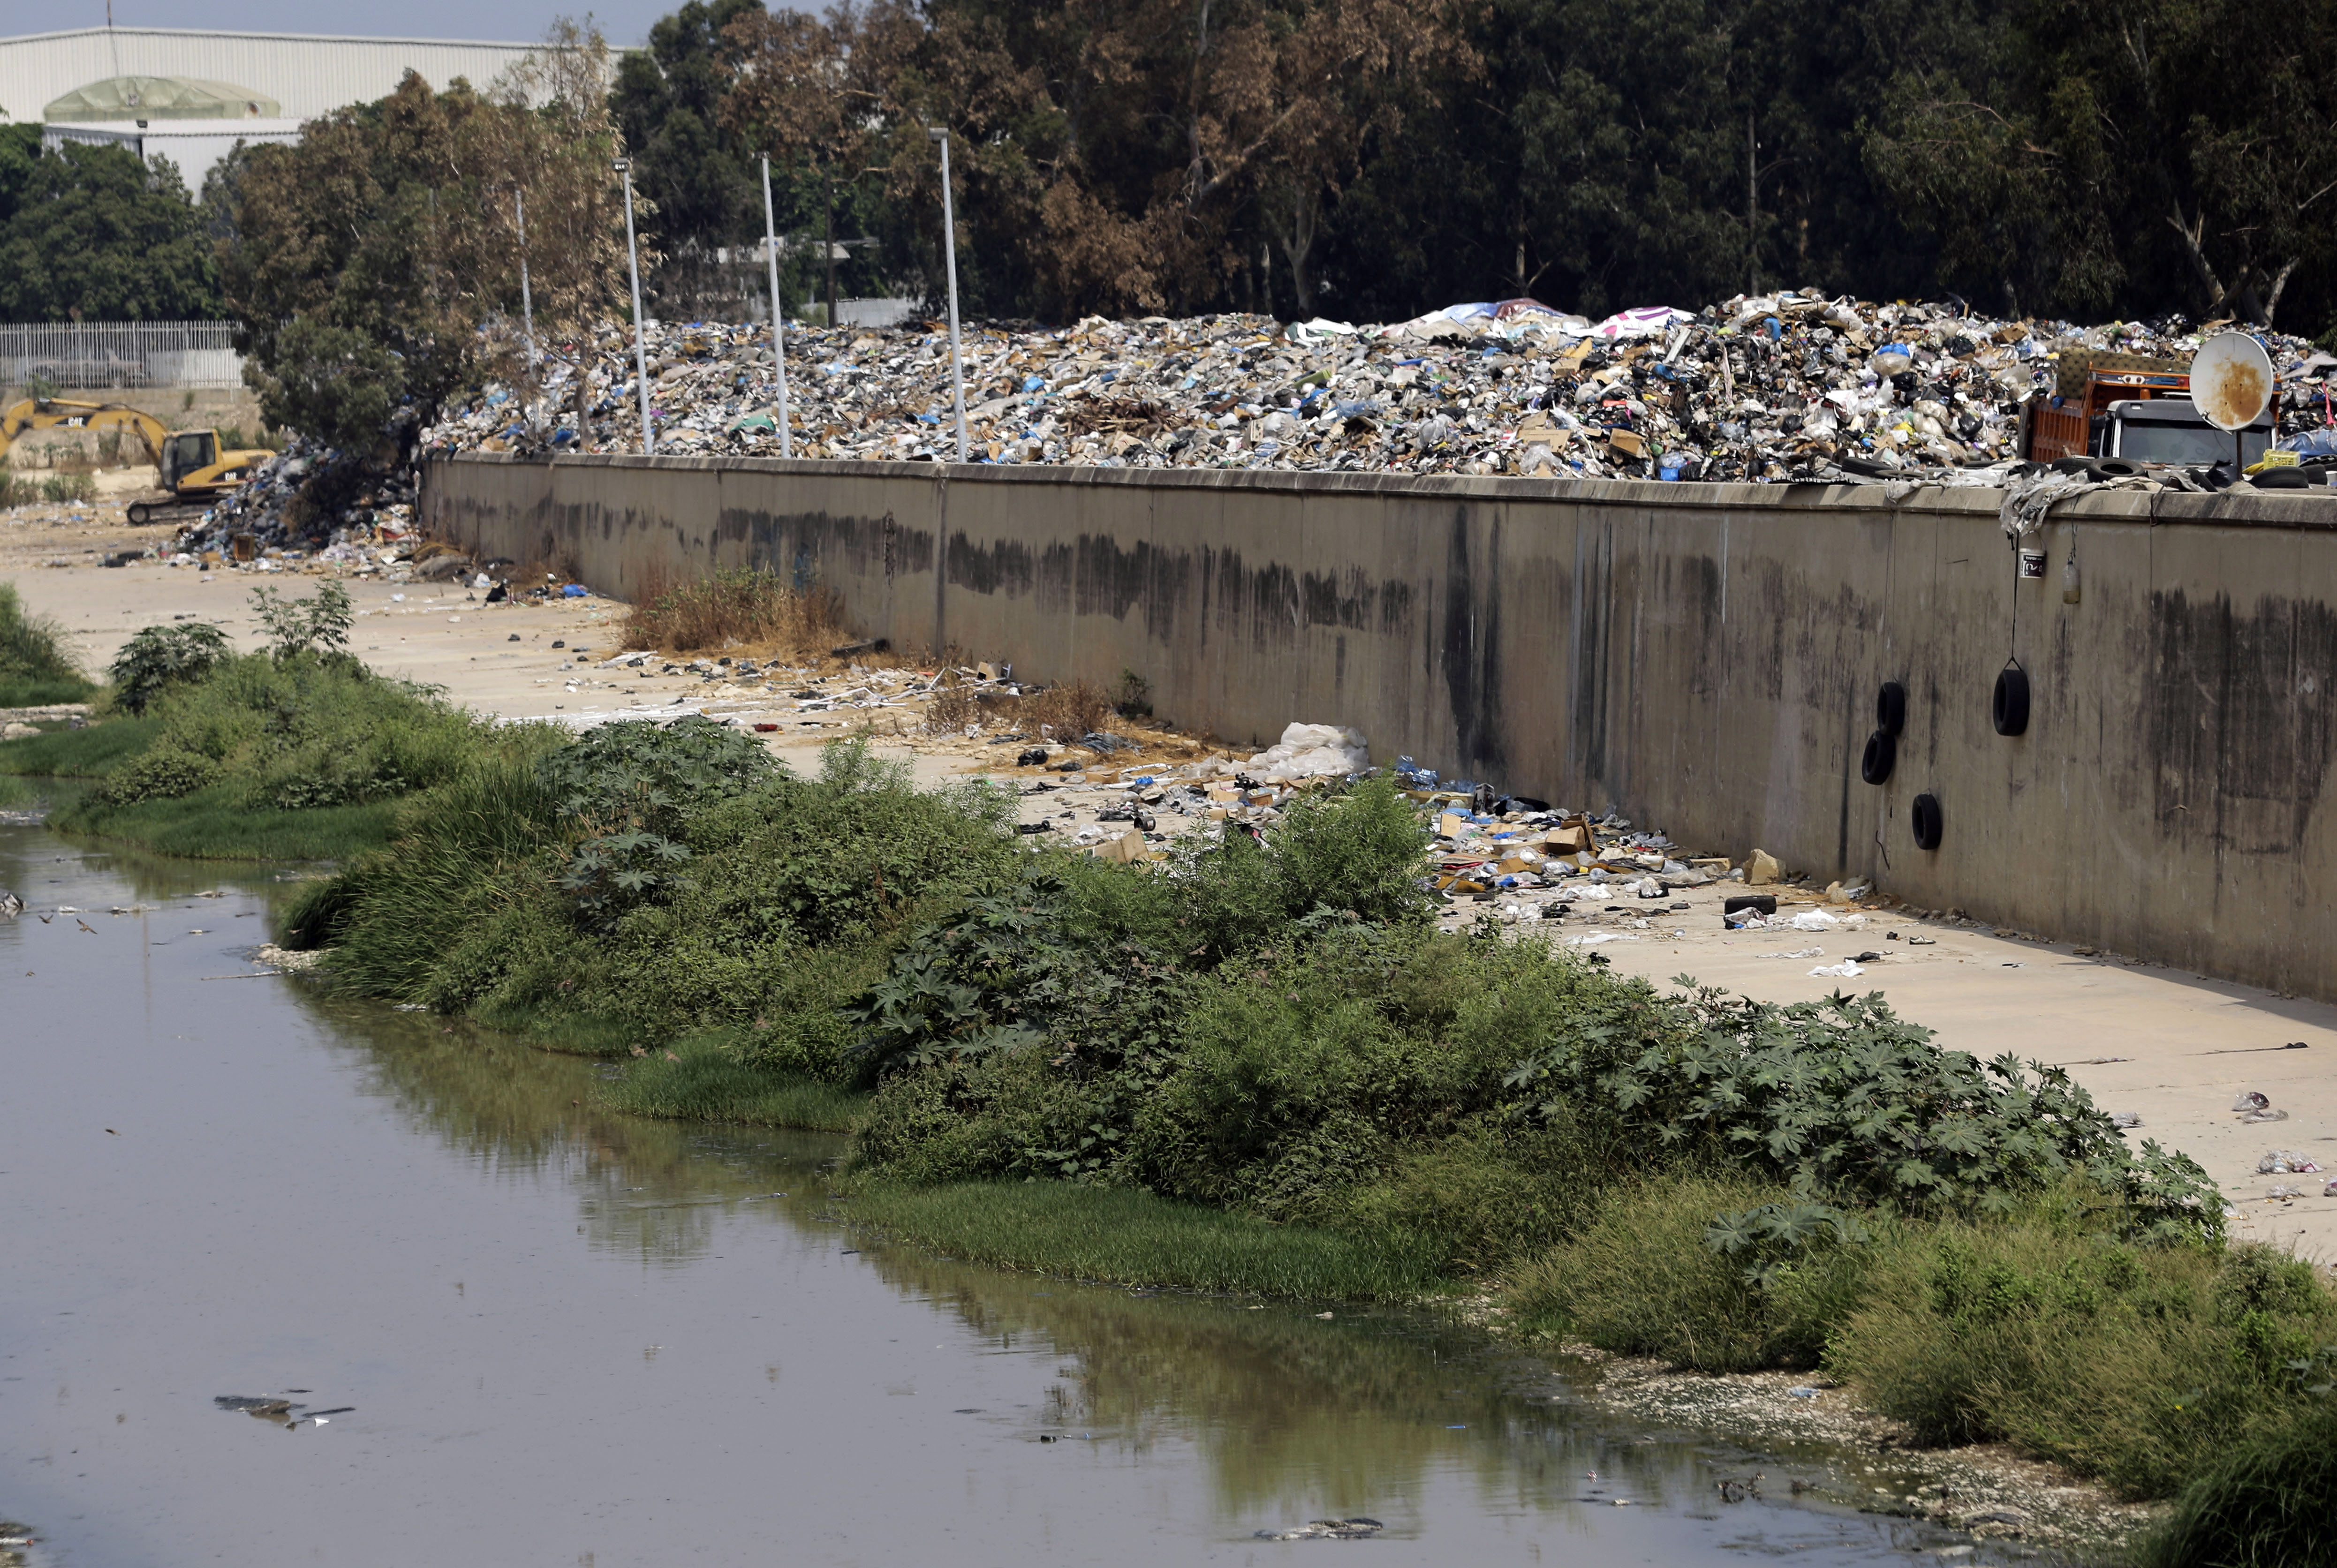 Garbage is piled on the bank of the Beirut River, in Beirut, Lebanon, Monday, Sept. 7, 2015. Lebanon has been witnessing a wave of anti-government rallies, sparked by the government's inability to solve an ongoing trash crisis. Those rallies have been led by civil society groups who came together to protest government corruption that led to the latest gridlock. (AP Photo/Hassan Ammar)